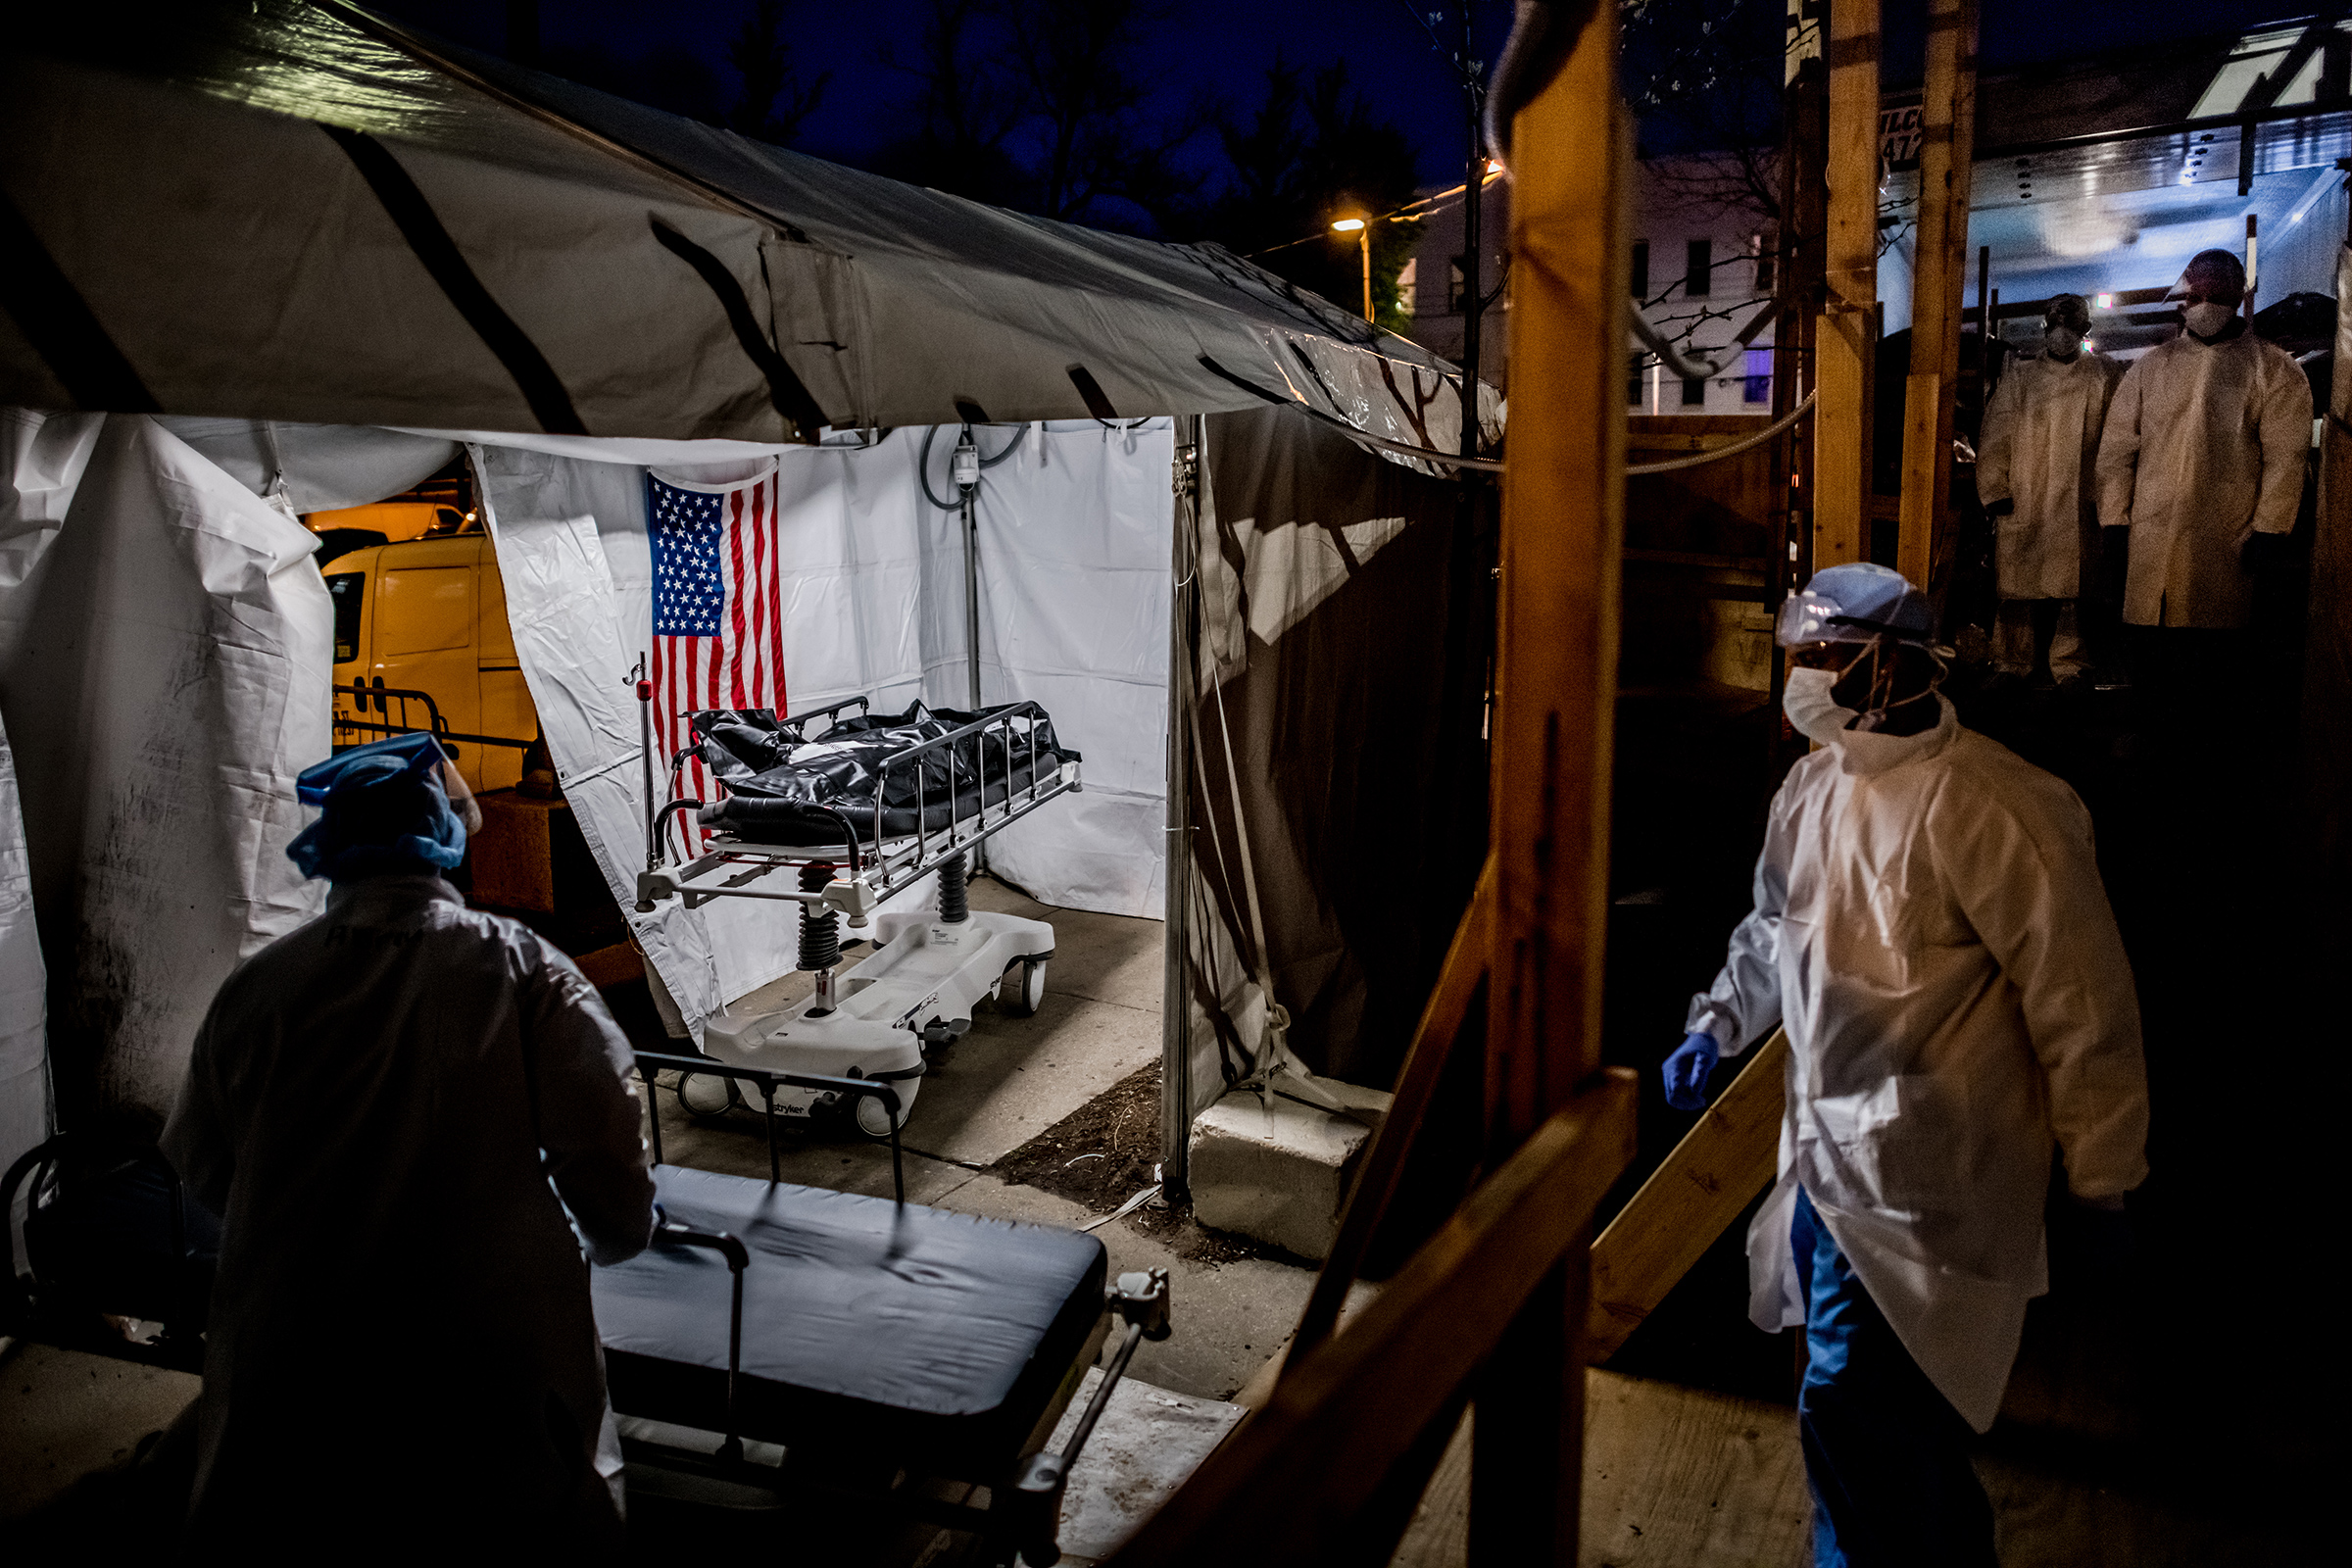 The transport team moves the body bags of deceased COVID-19 patients from the overflowing morgue of Brooklyn's Wyckoff Heights Medical Center into the improvised morgue set up outside on April 27. Three refrigerated semitrailers, capable of holding more than 150 bodies between them, were brought in as an emergency solution during the height of the pandemic. The transports often occurred at night to avoid upsetting neighbors of the hospital. (Meridith Kohut for TIME)